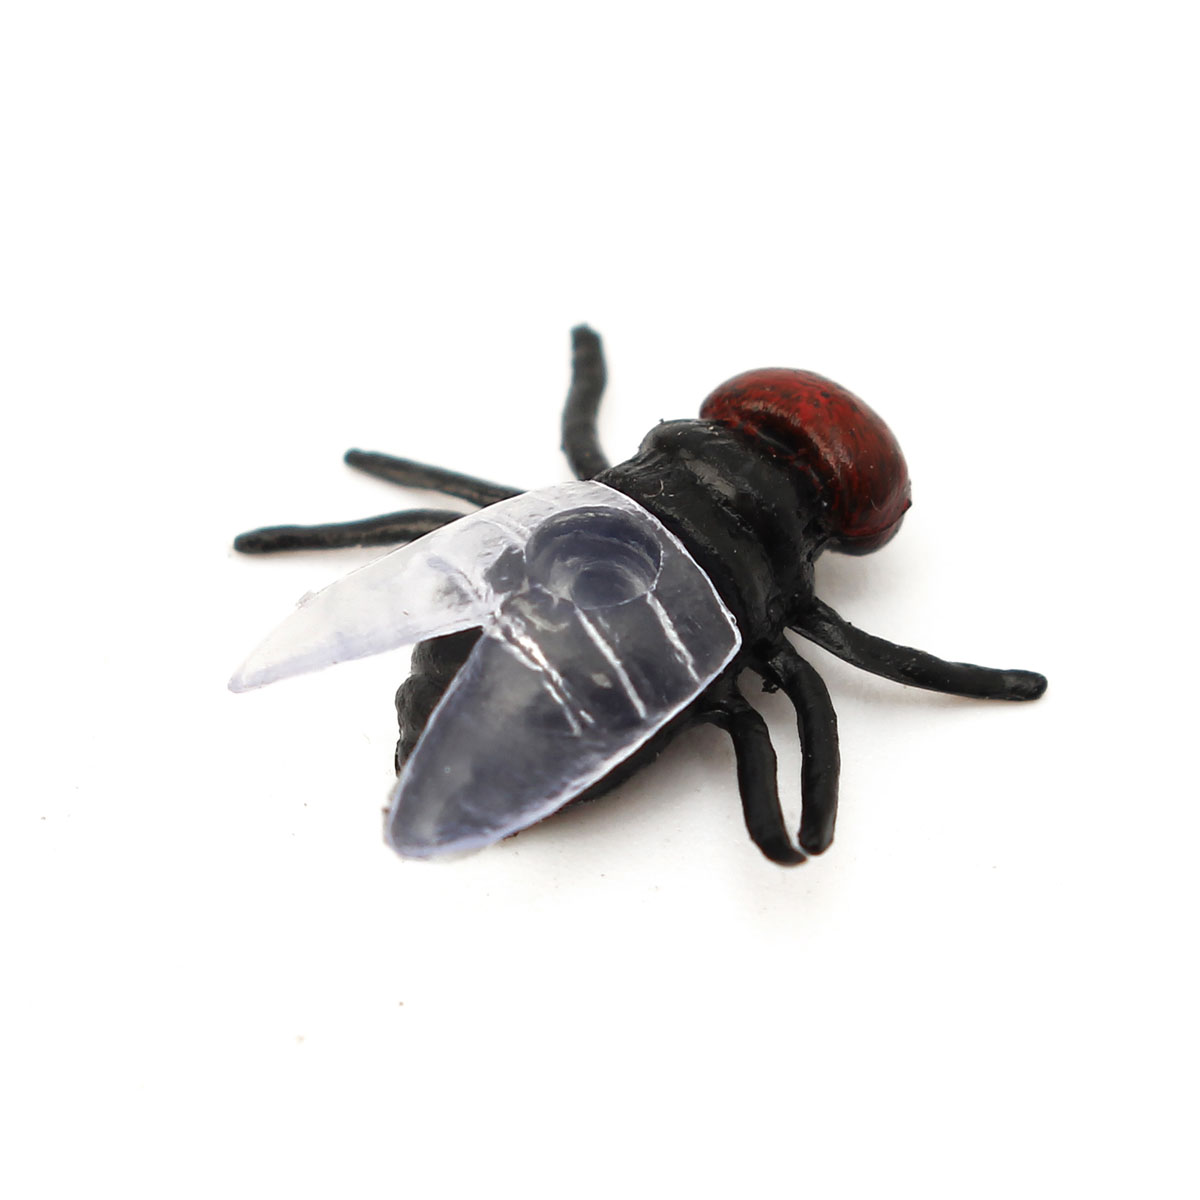 10PCS-April-Fools-Day-House-Fly-Animal-Toy-Joke-Prank-Funny-Magic-Props-Gifts-1104270